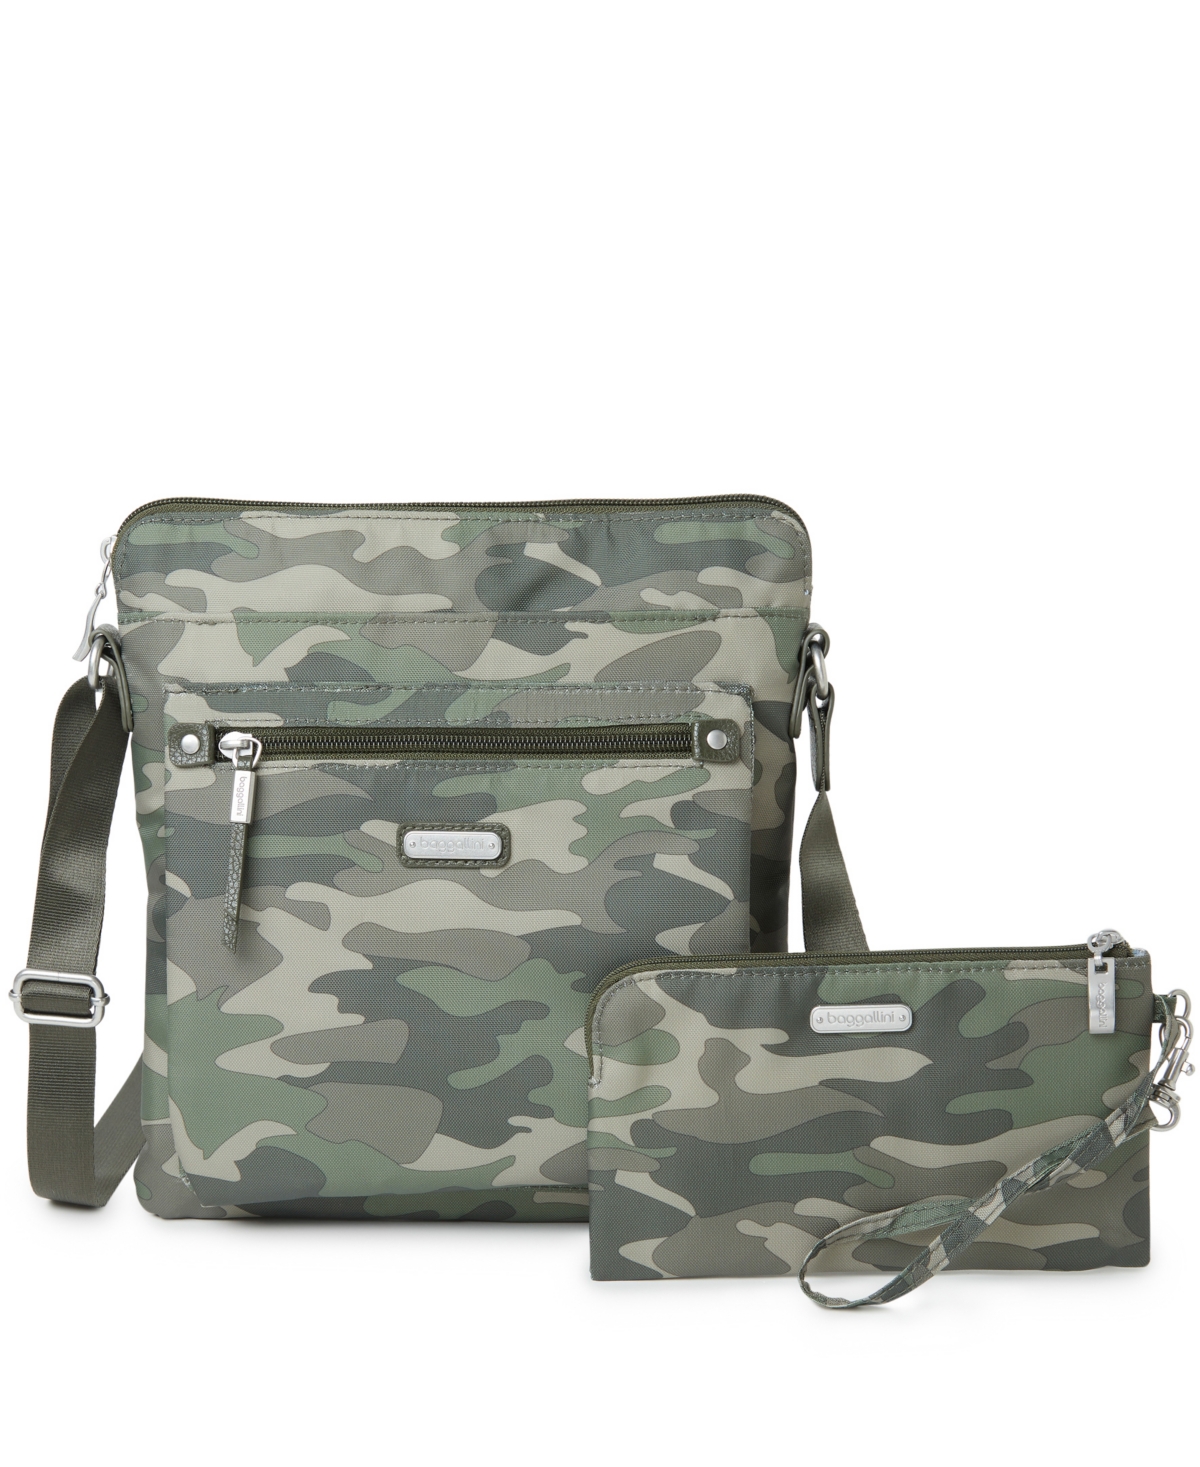 Backstage Go Bagg Polyester Small Crossbody And Rfid Phone Wristlet In Olive Camo